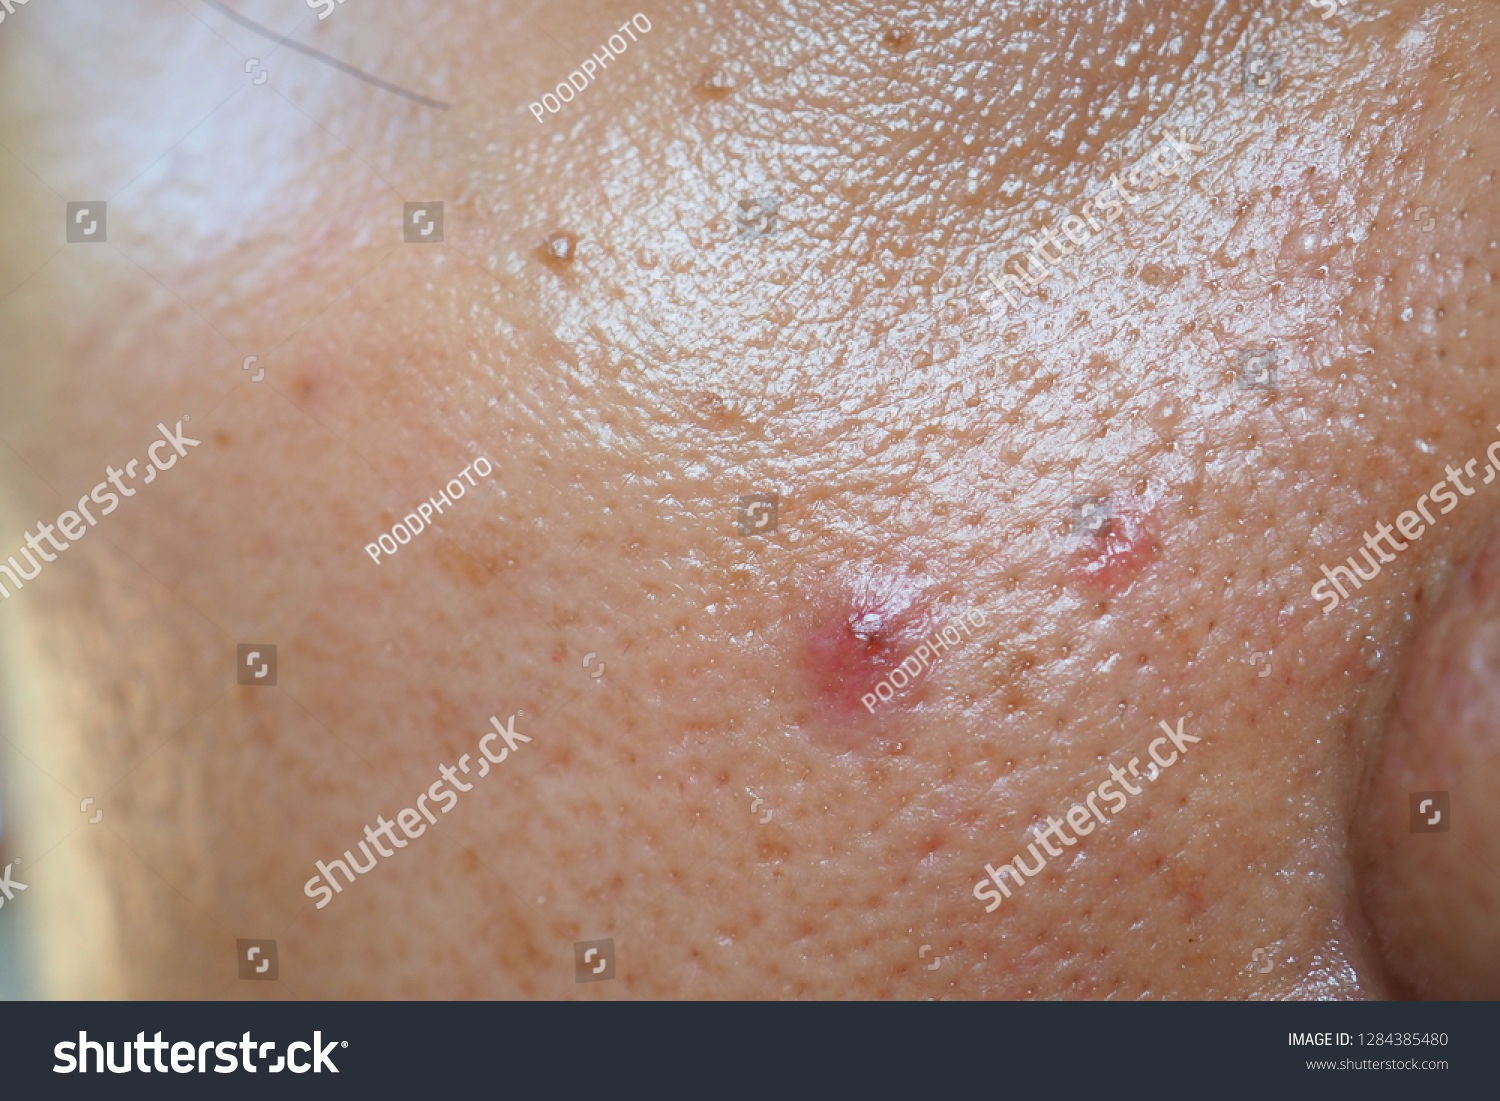 Pimple and acne on face skin and nose, zoom macro. Oily pore skin. #1284385480